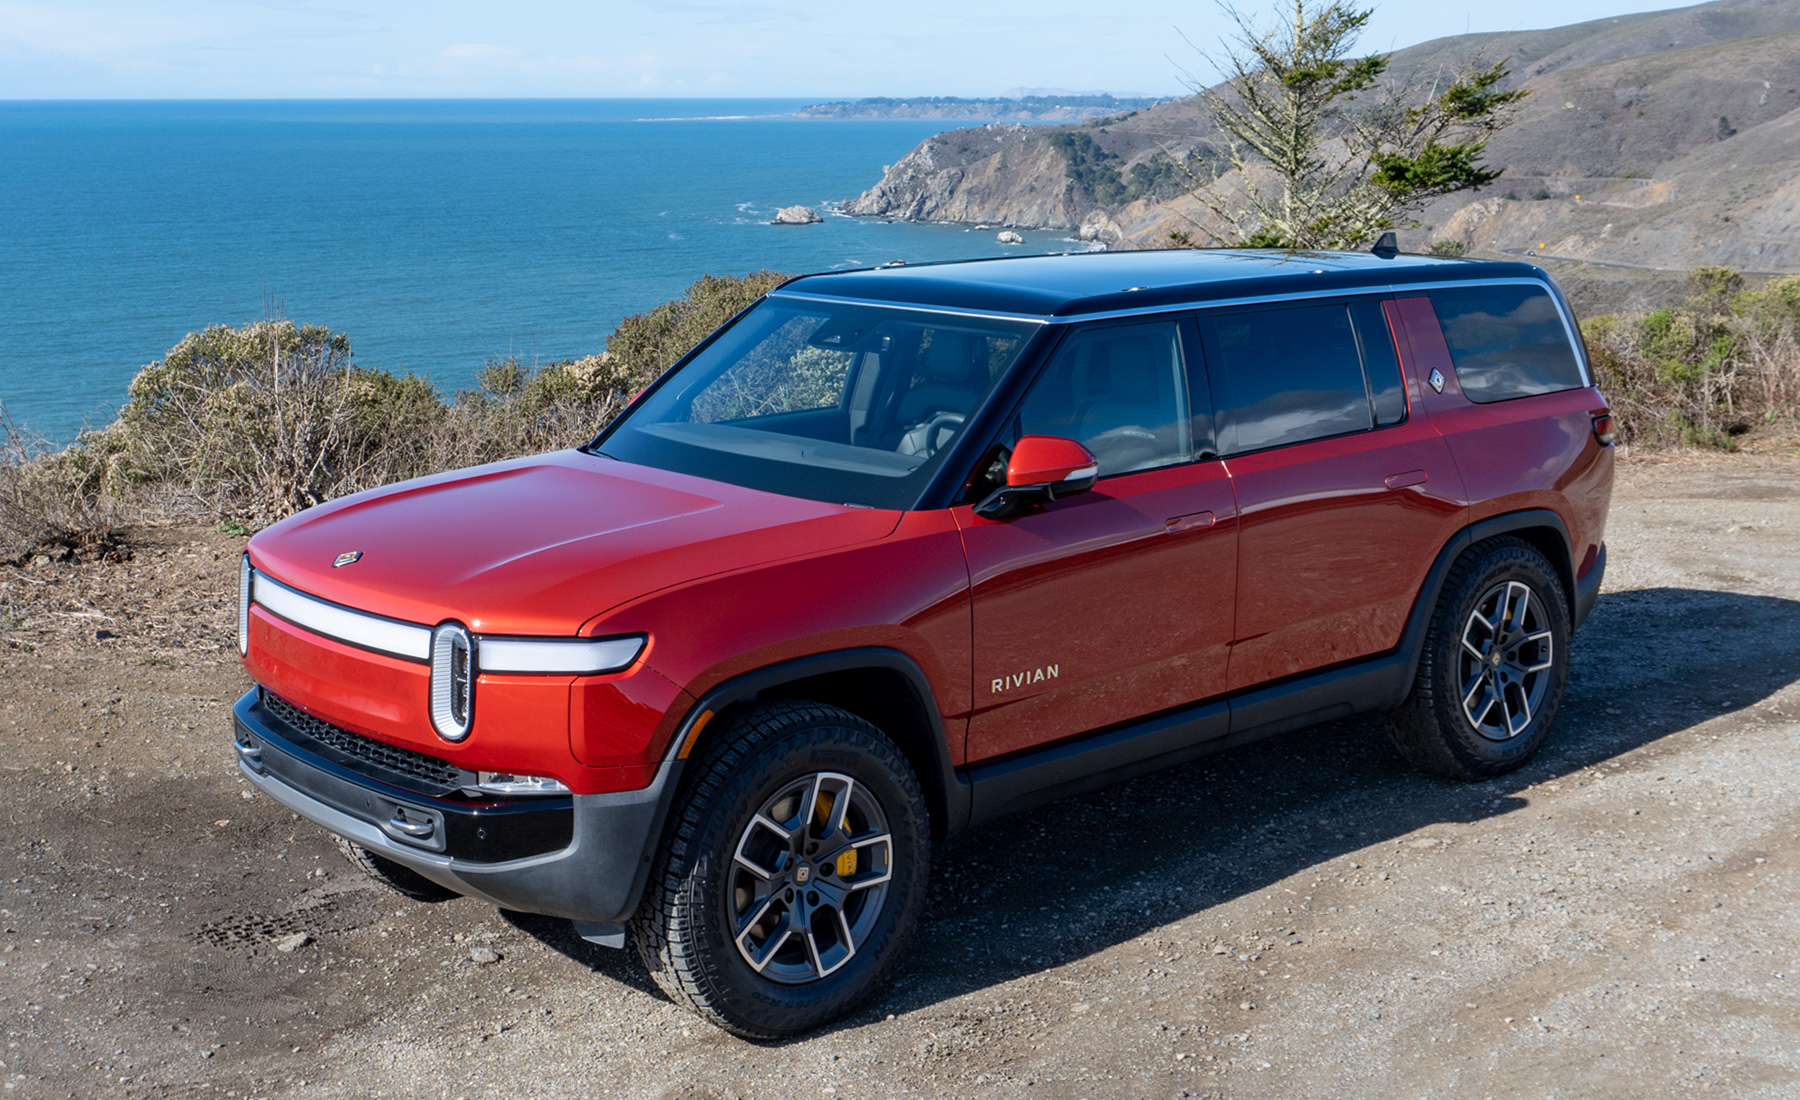 The Rivian R1S is an impressive electric SUV meant for adventures